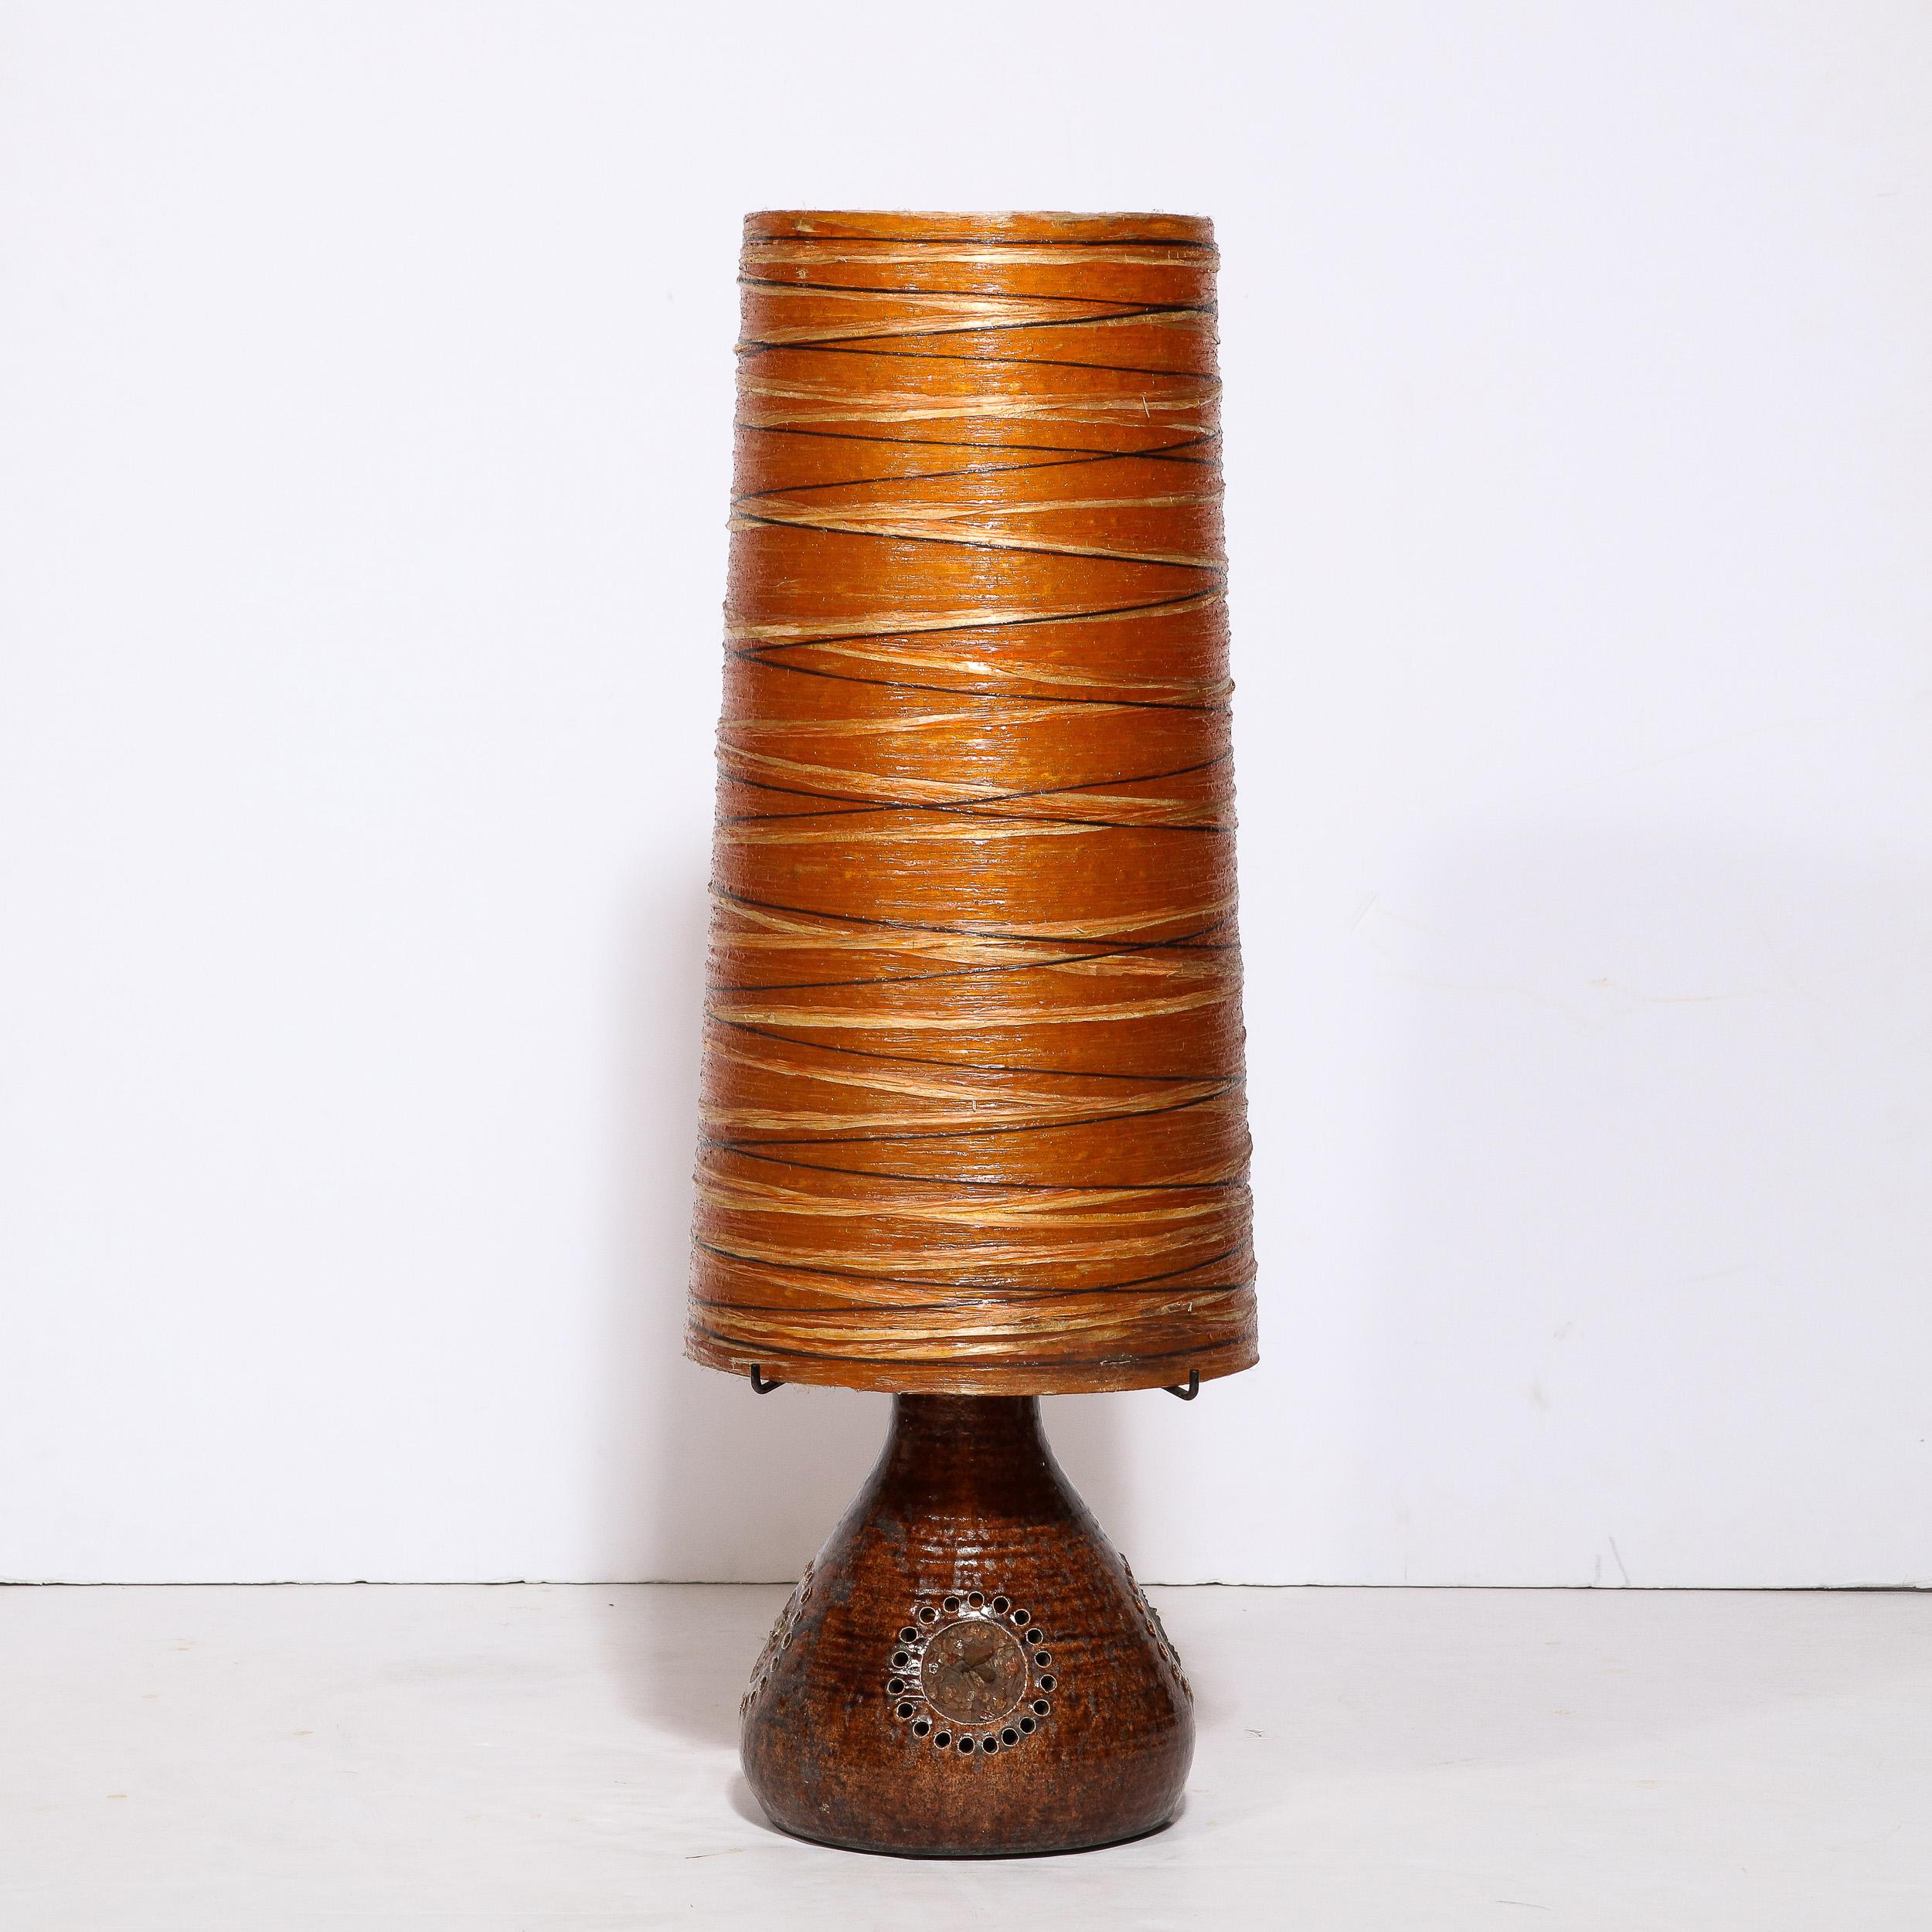 Midcentury Brutalist Ceramic Table Lamp with Horizontally Striated Resin Shade For Sale 6